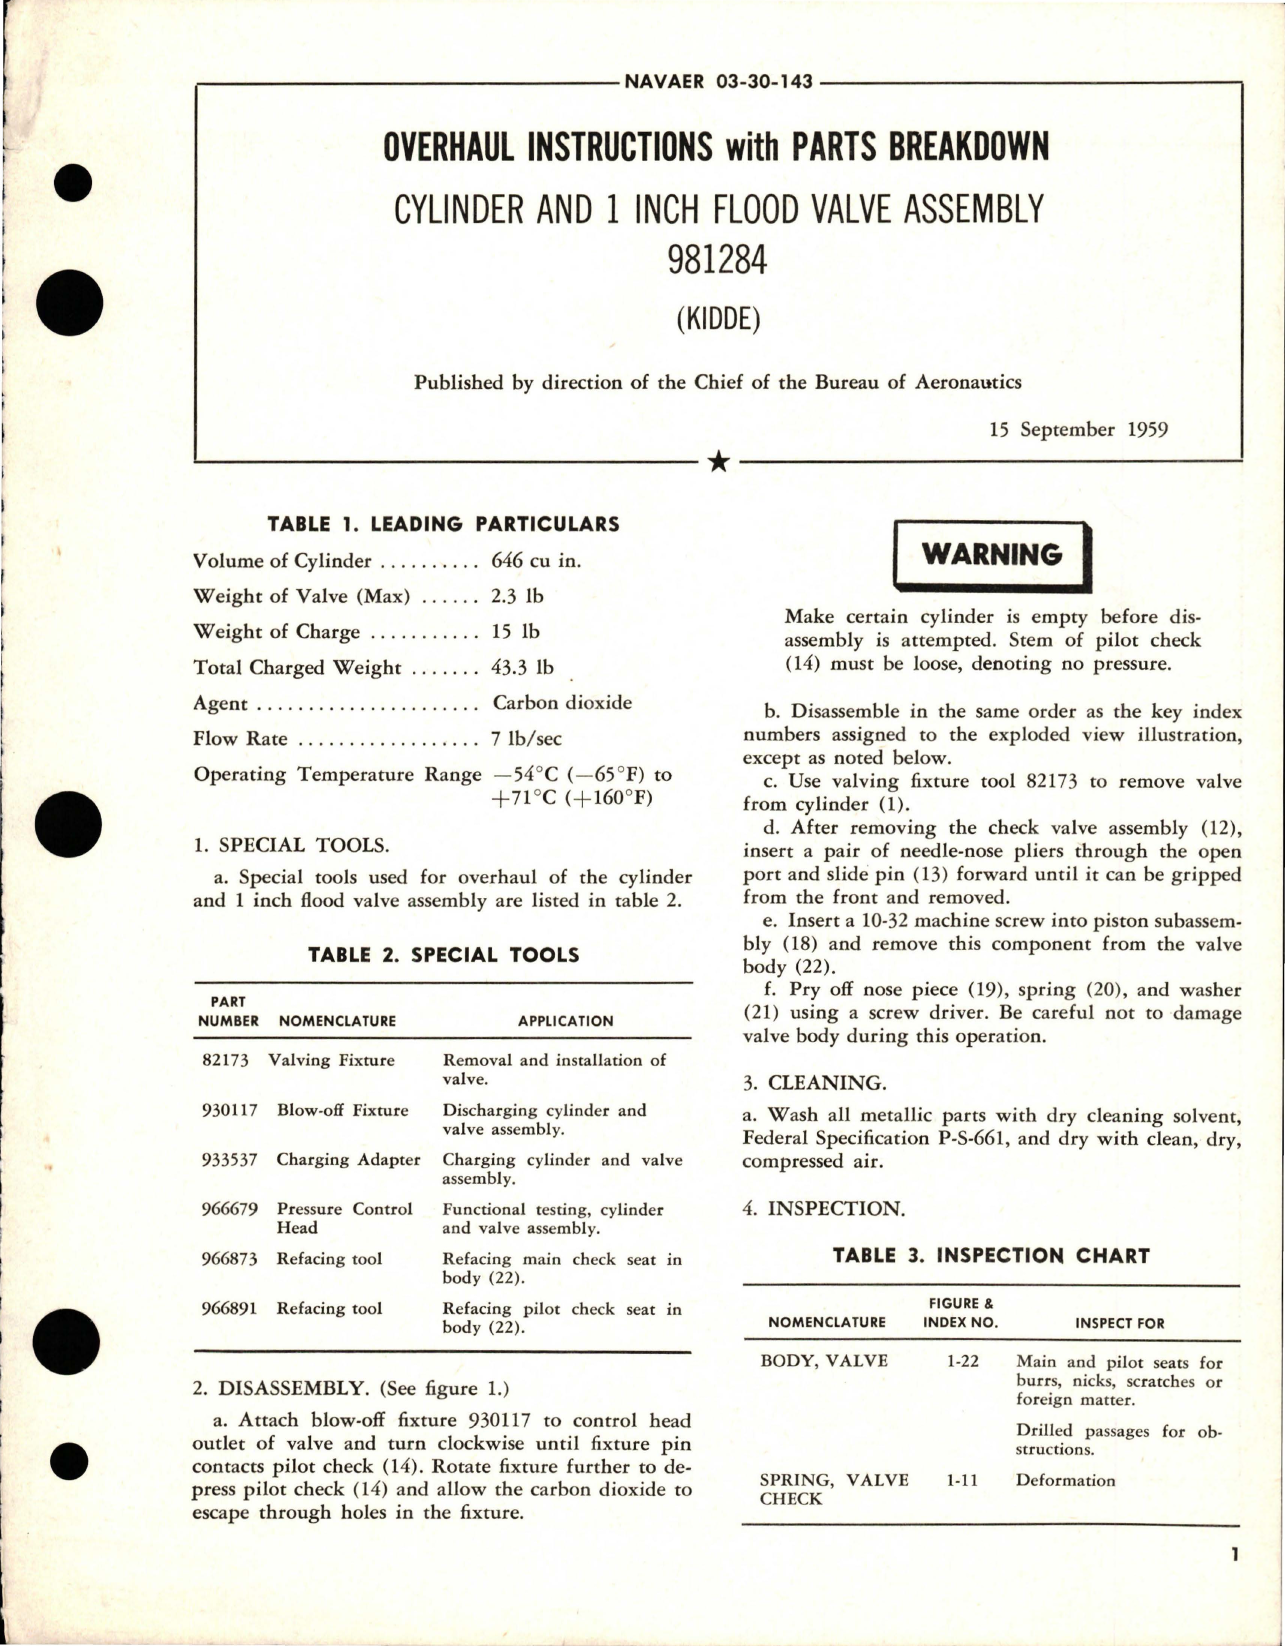 Sample page 1 from AirCorps Library document: Overhaul Instructions with Parts Breakdown for Cylinder and 1 inch Flood Valve Assembly - 981284